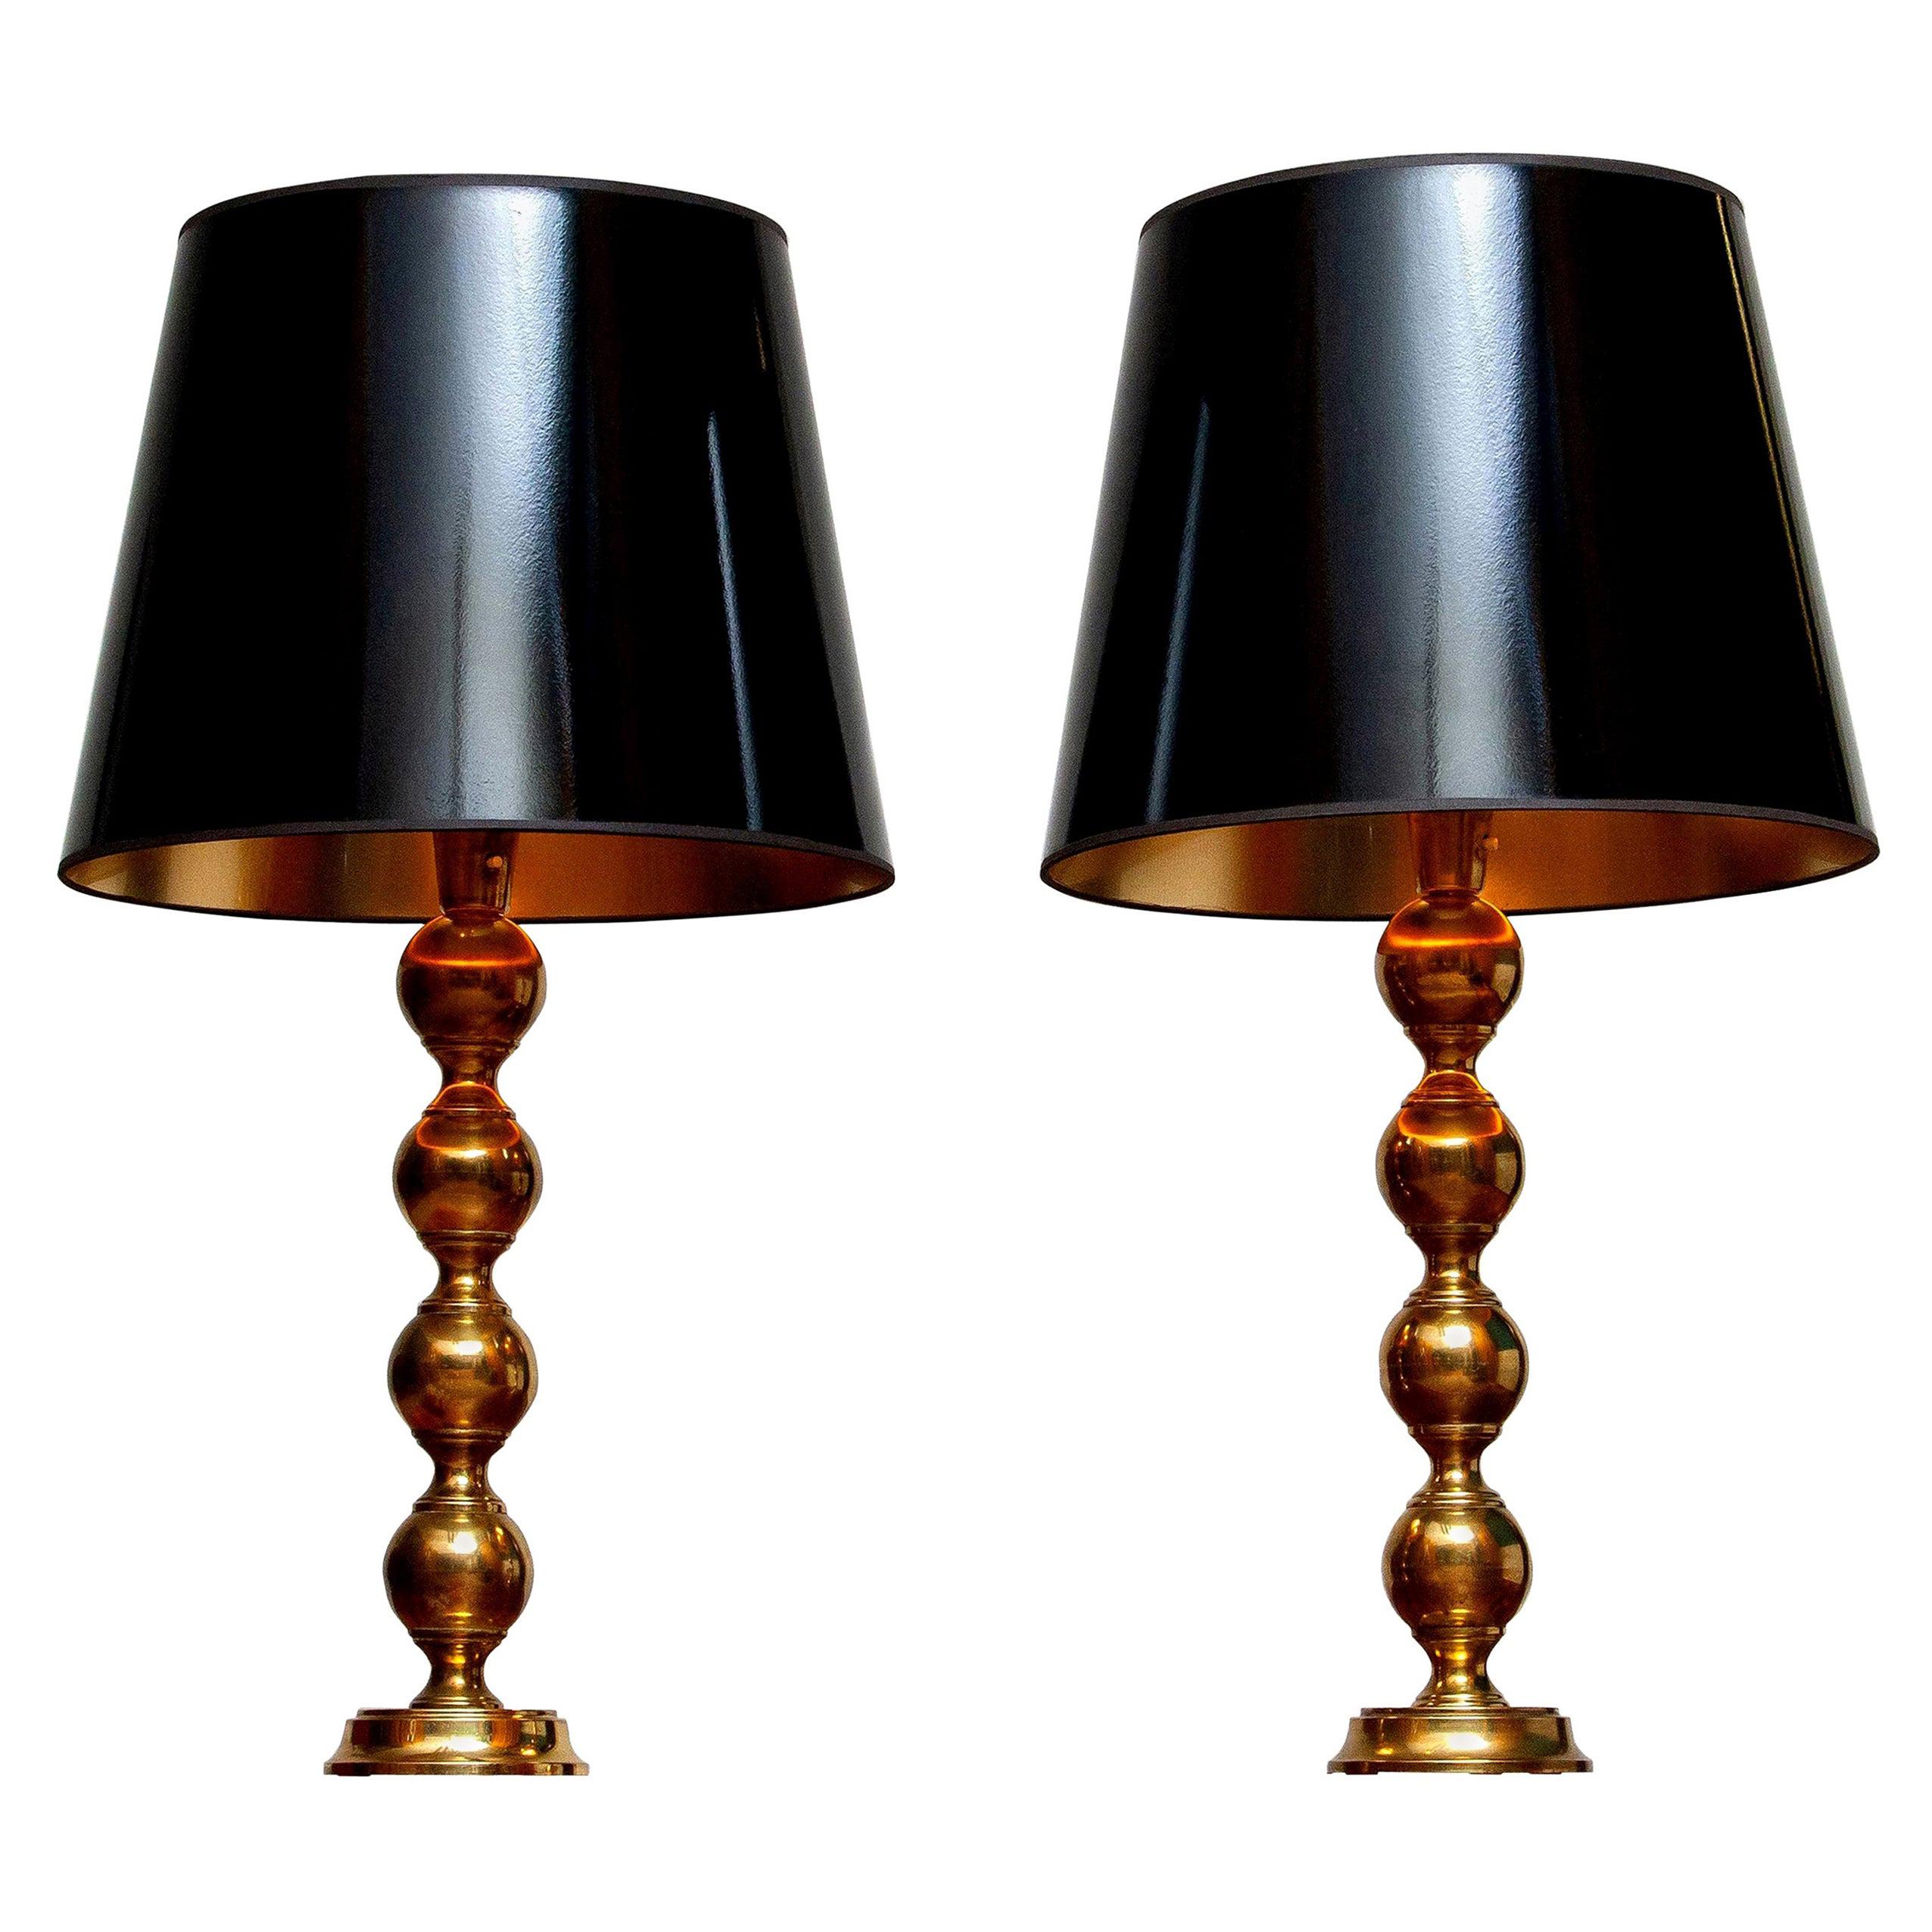 1950s, Set of Brass Spherical Extra Large Swedish Table Lamps with Black Shades